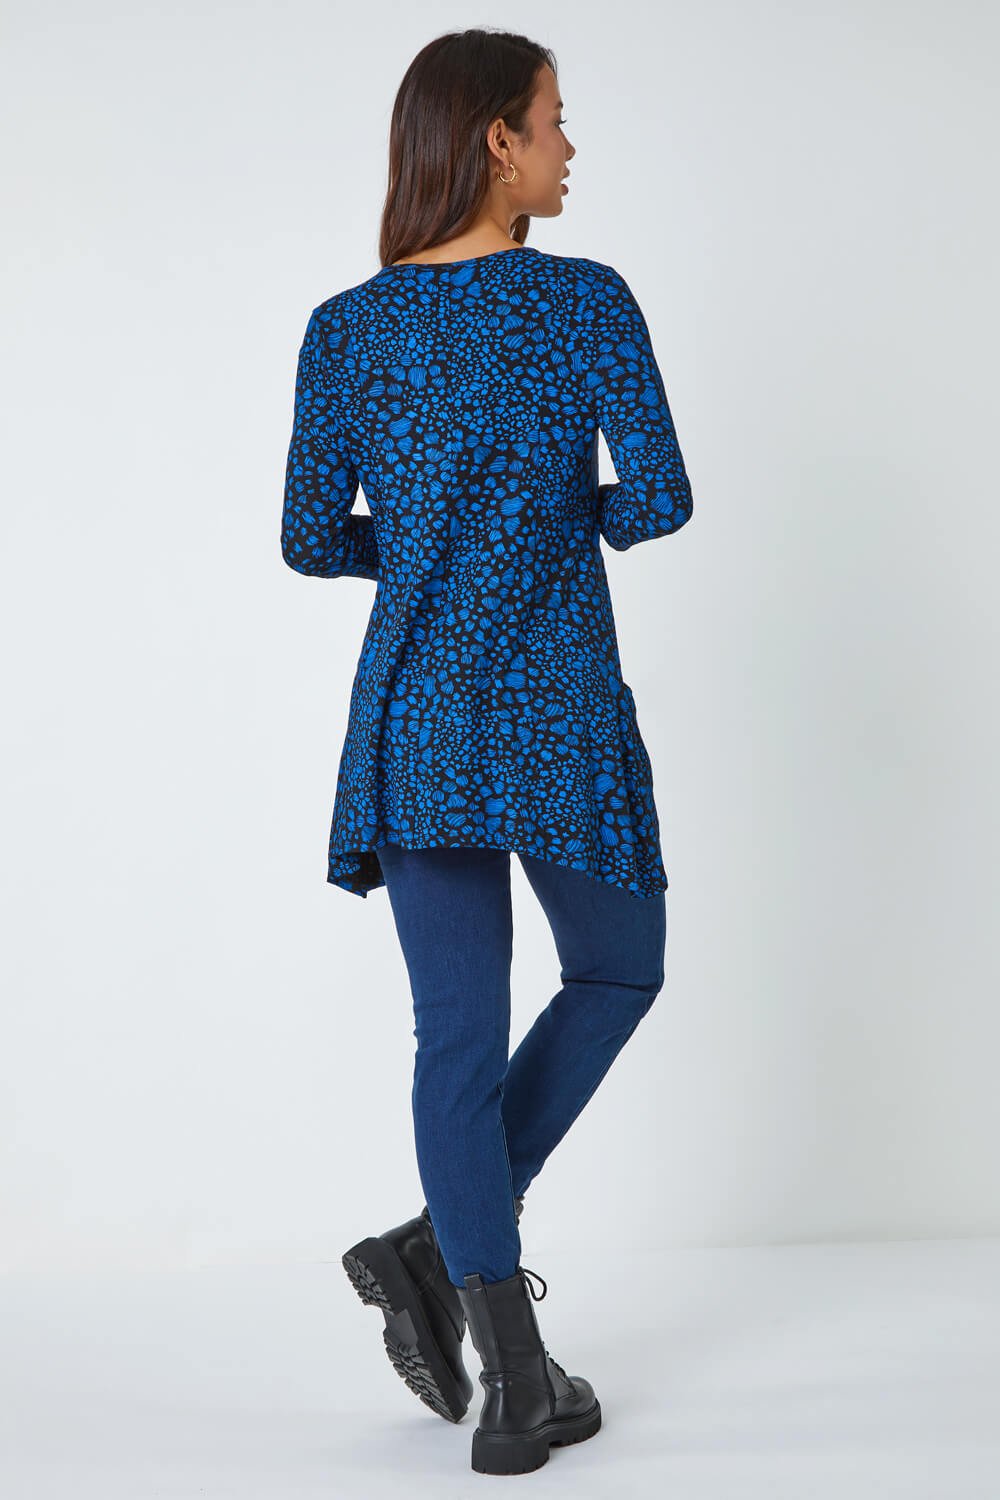 Blue Spot Print Stretch Swing Top , Image 3 of 5